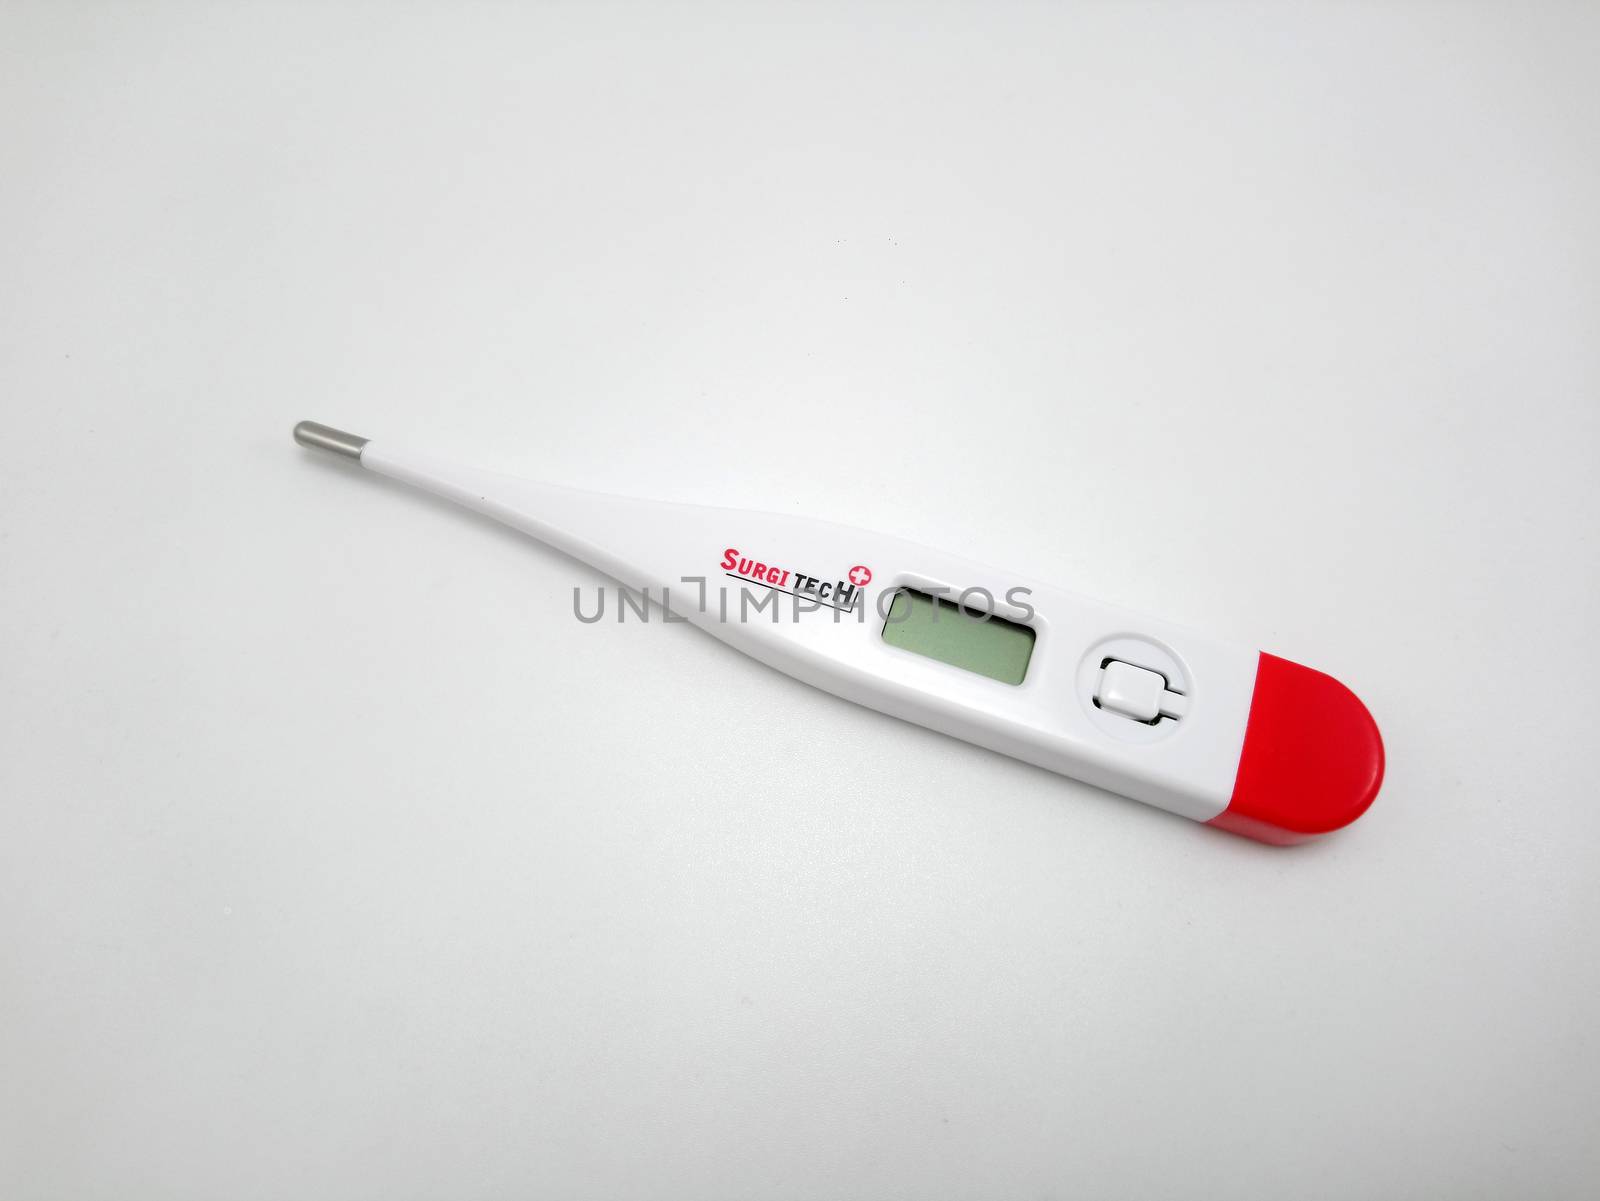 Surgitech digital thermometer in Manila, Philippines by imwaltersy